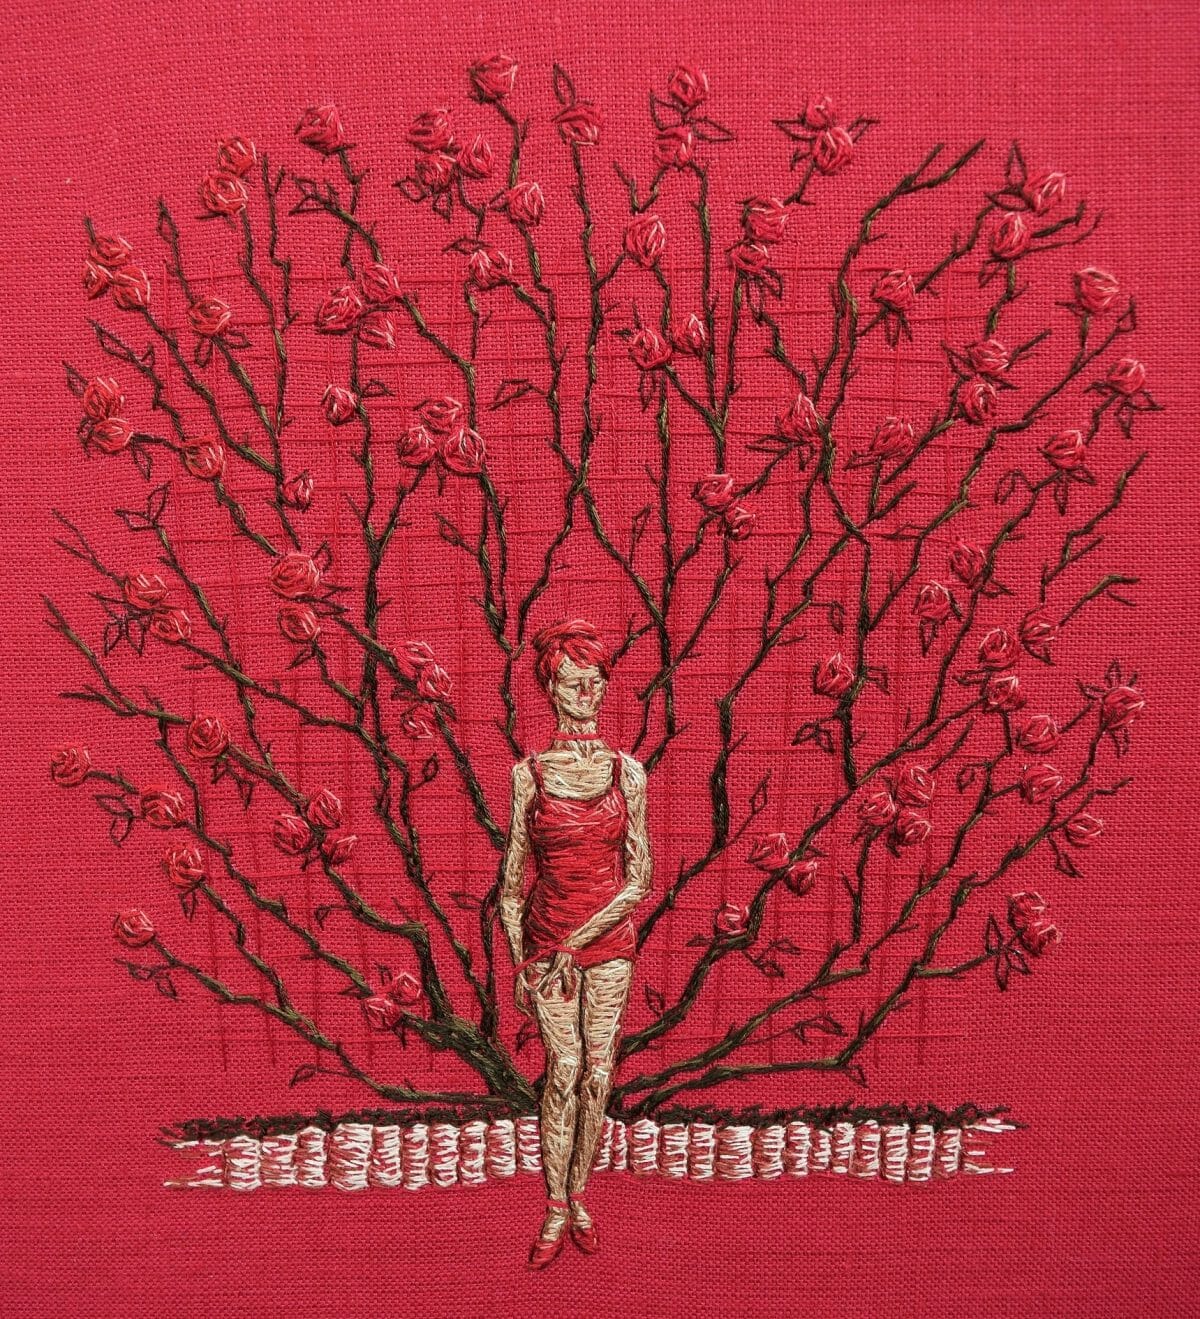 Michelle Kingdom - Precisely Red (2017) – Hand Embroidery